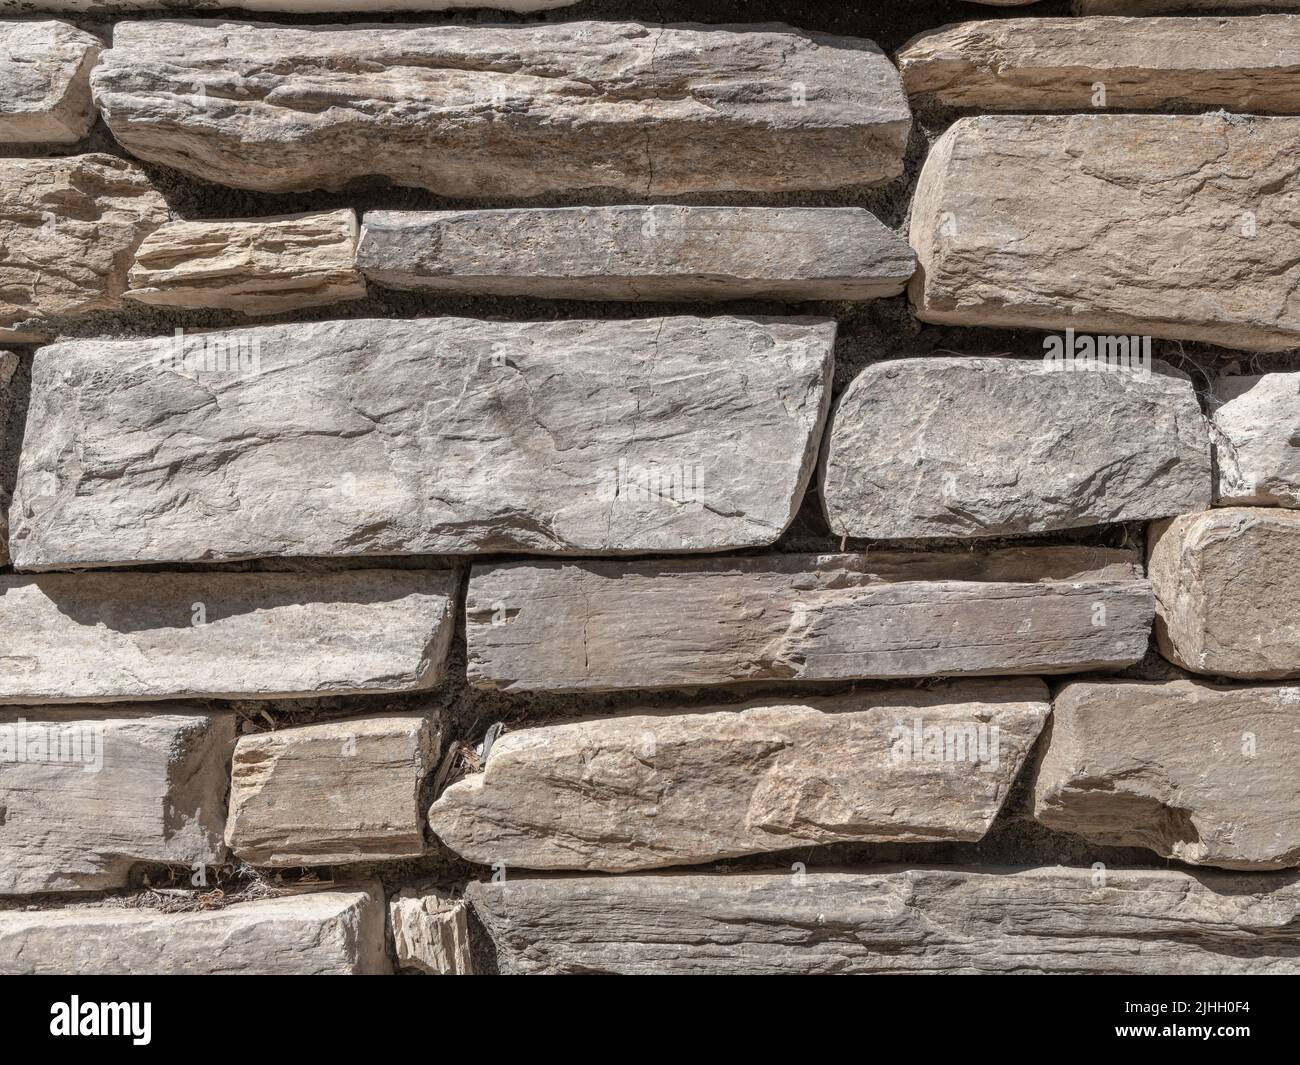 Medium close-up perspective of stacked and fitted exterior stone wall Stock Photo